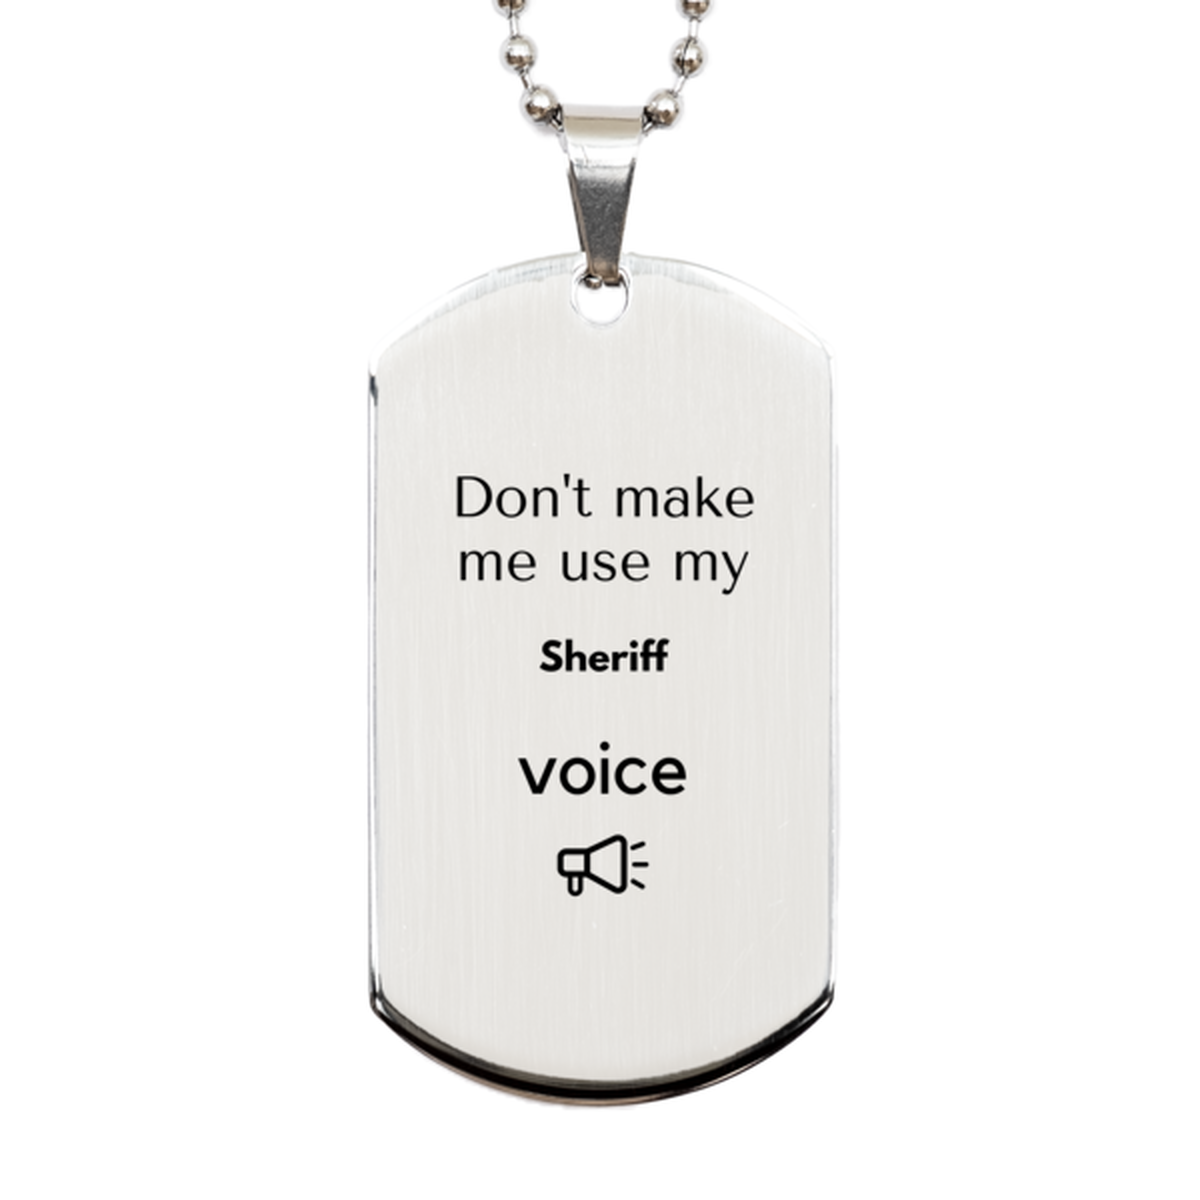 Don't make me use my Sheriff voice, Sarcasm Sheriff Gifts, Christmas Sheriff Silver Dog Tag Birthday Unique Gifts For Sheriff Coworkers, Men, Women, Colleague, Friends